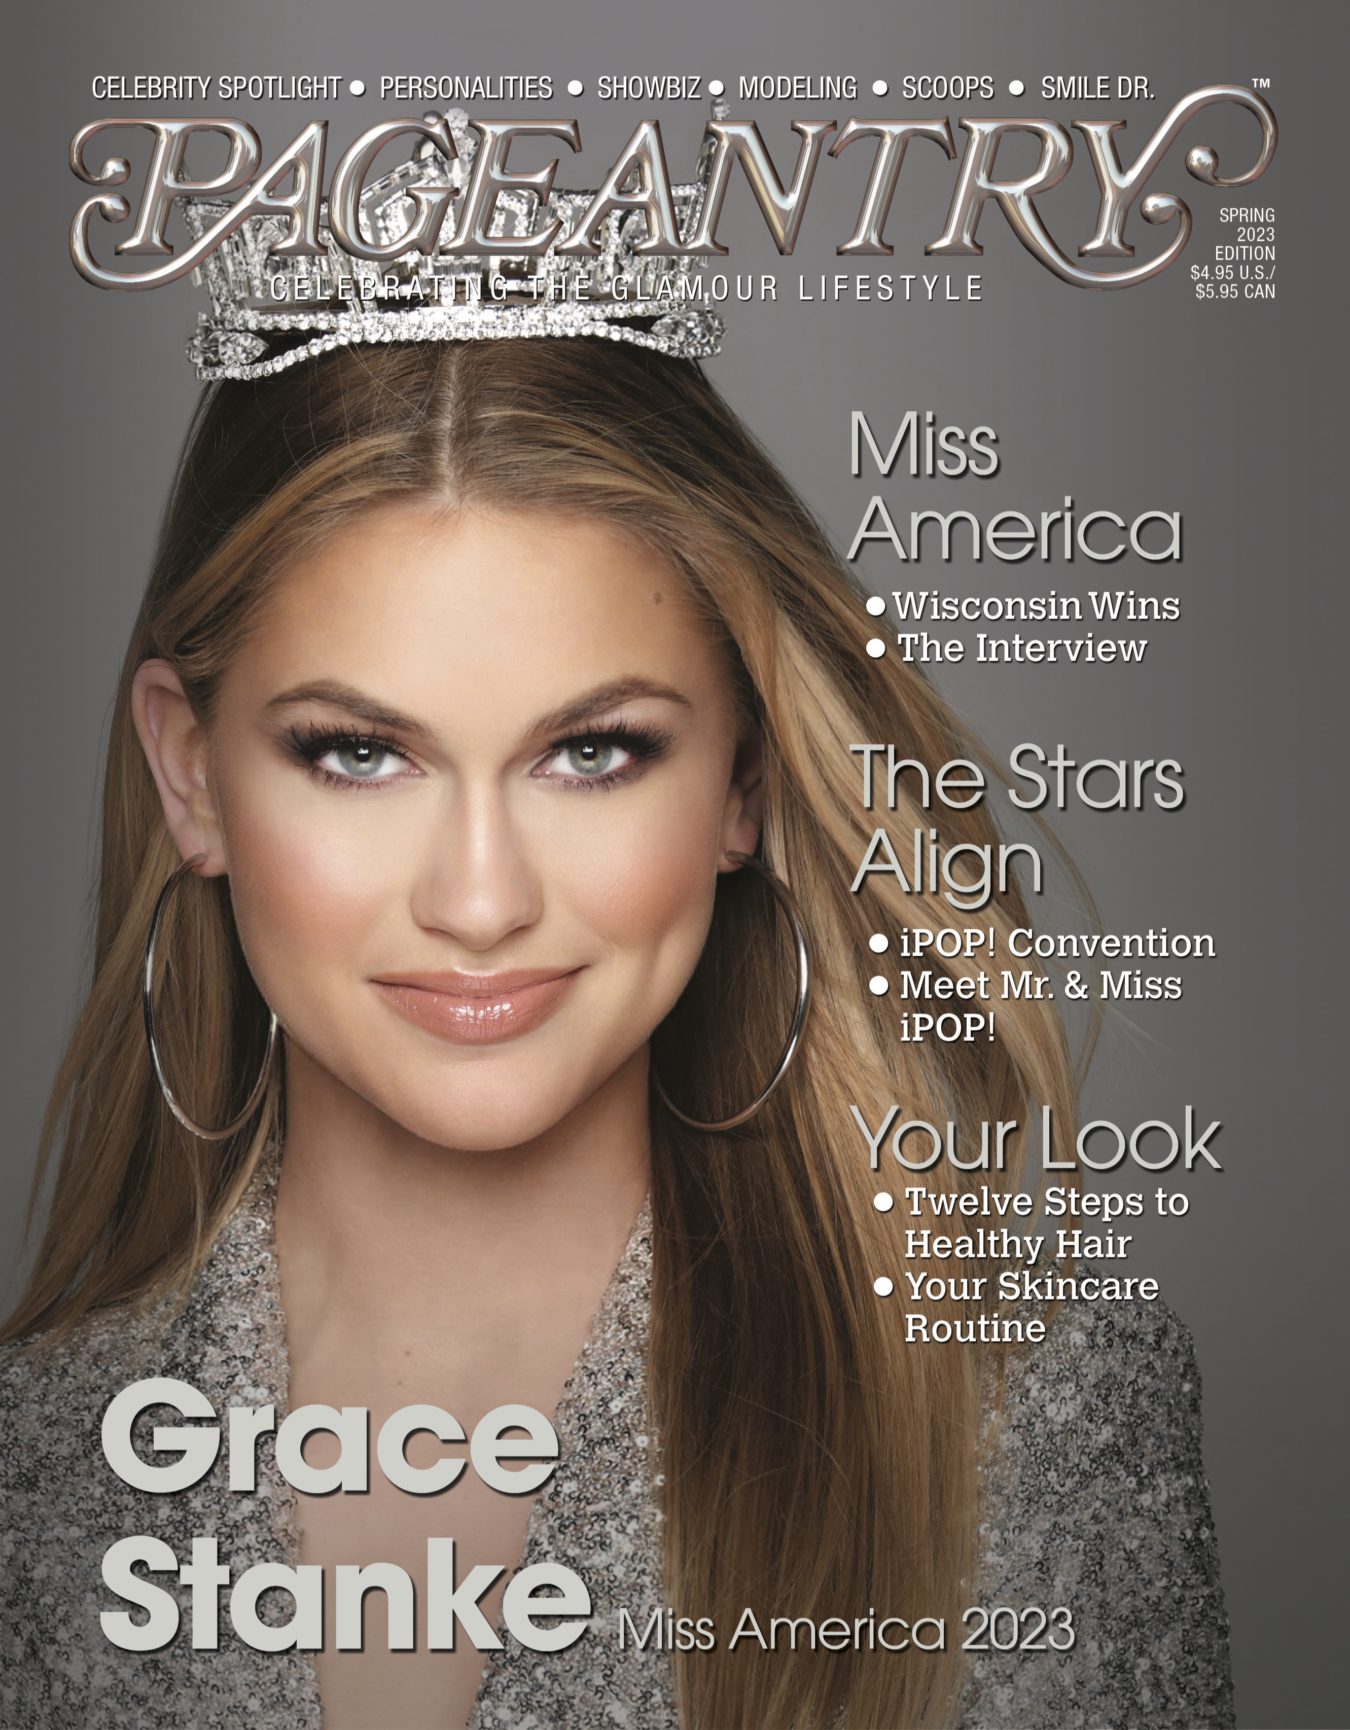 Pageantry Digital Pageantry Magazine In Todays Digital And Mobile Format